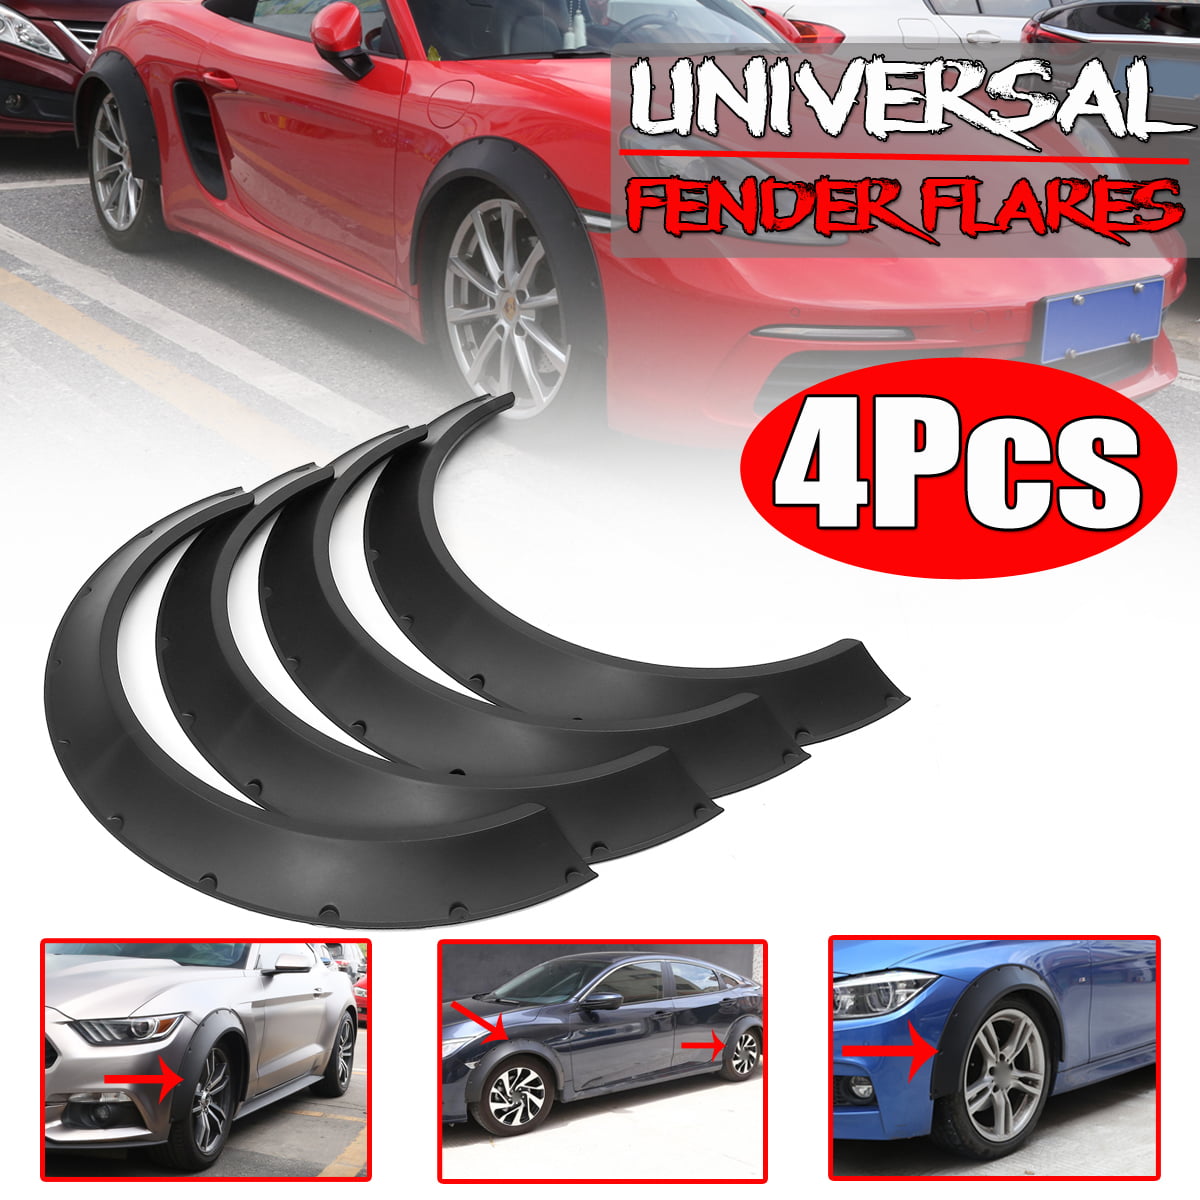 4x 3.5/'/' Universal Car Front Rear Fender Flares Wide Body Kit Wheel Arches Cover